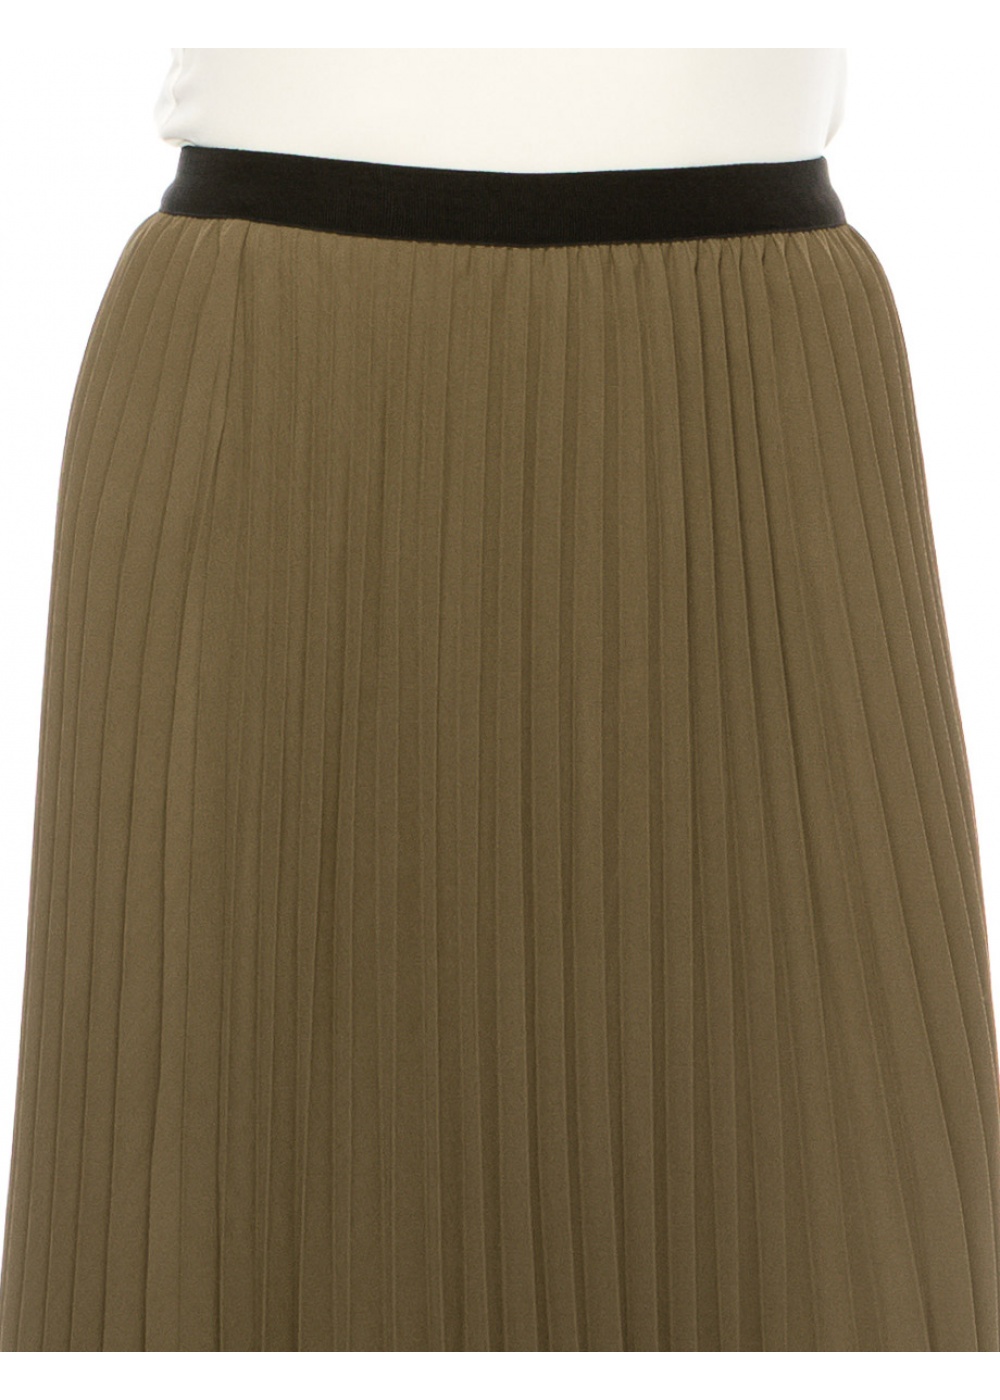 Classic Pleated Olive Skirt